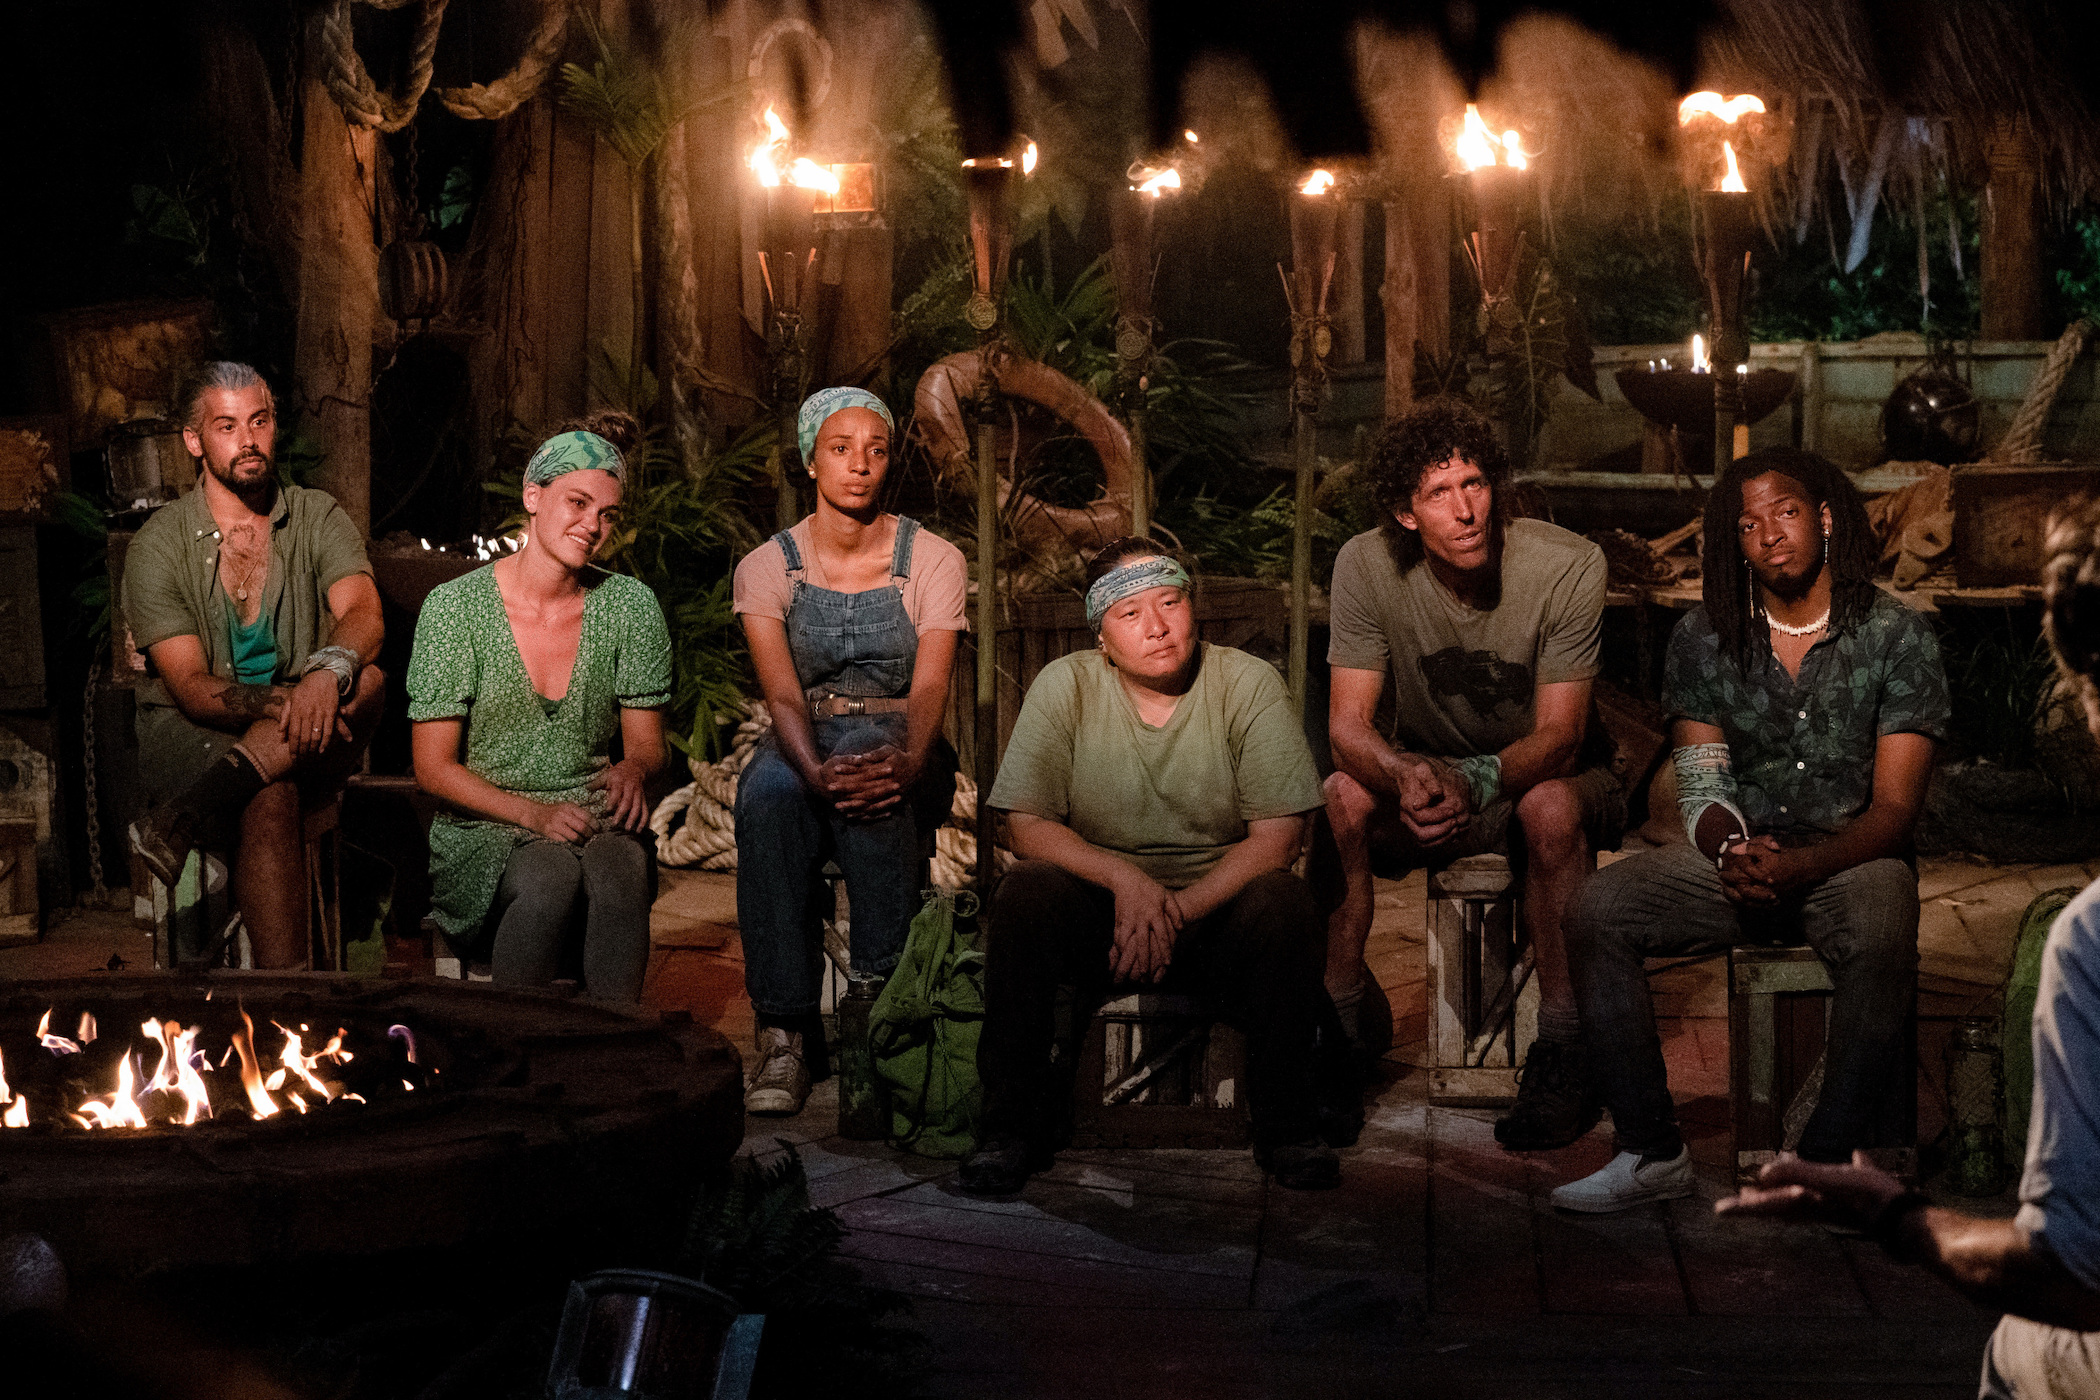 'Survivor' Season 41 tribe at Tribal Council at night surrounded by torches